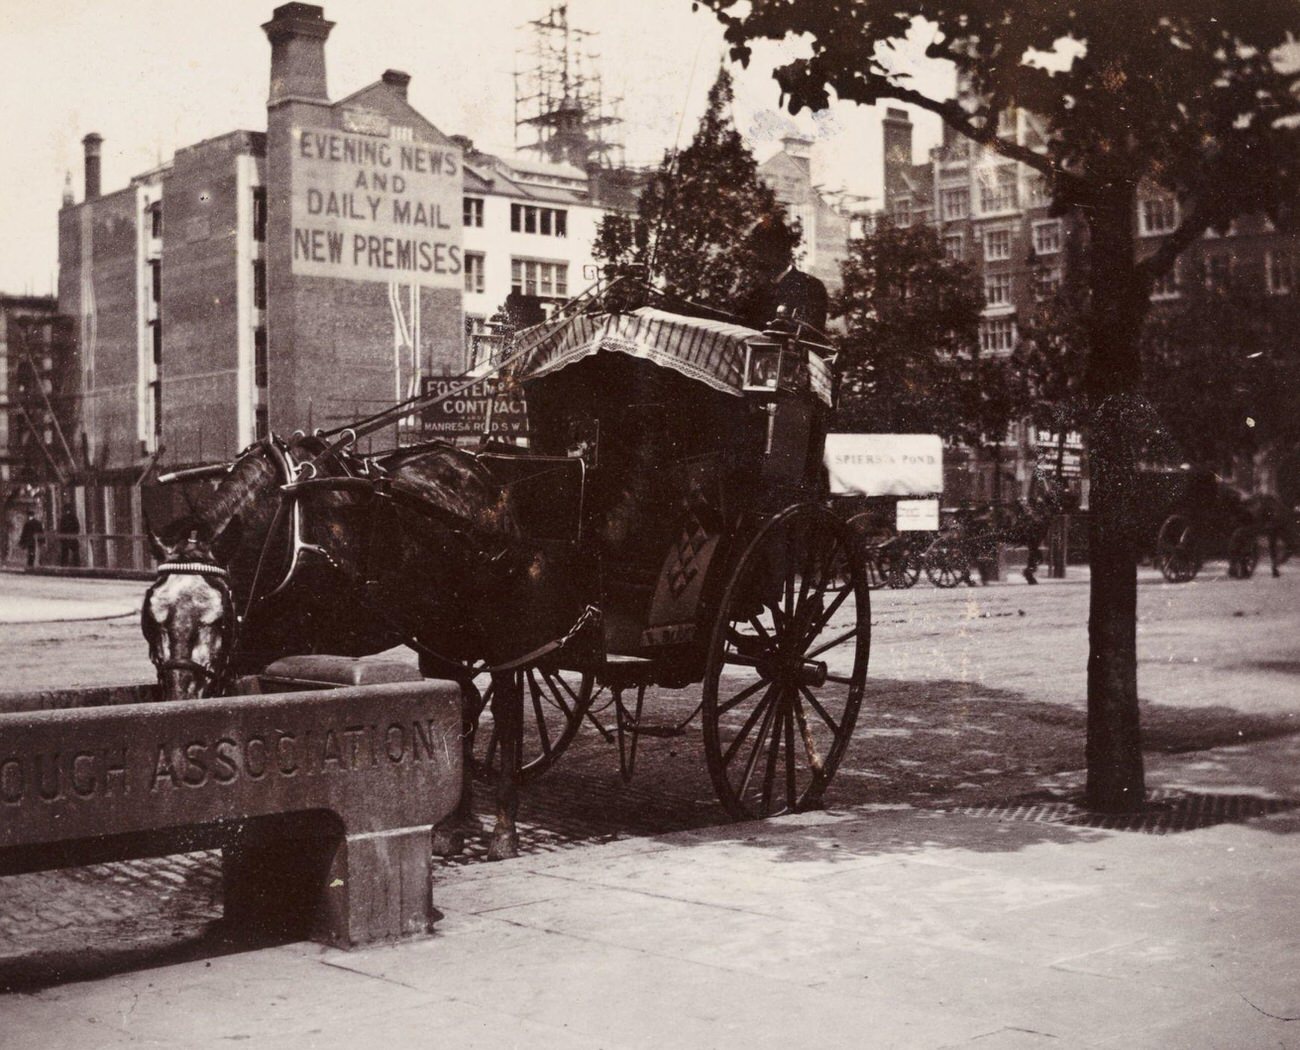 A Hansom cab and a horse drinking from a roadside trough in London, circa 1900.